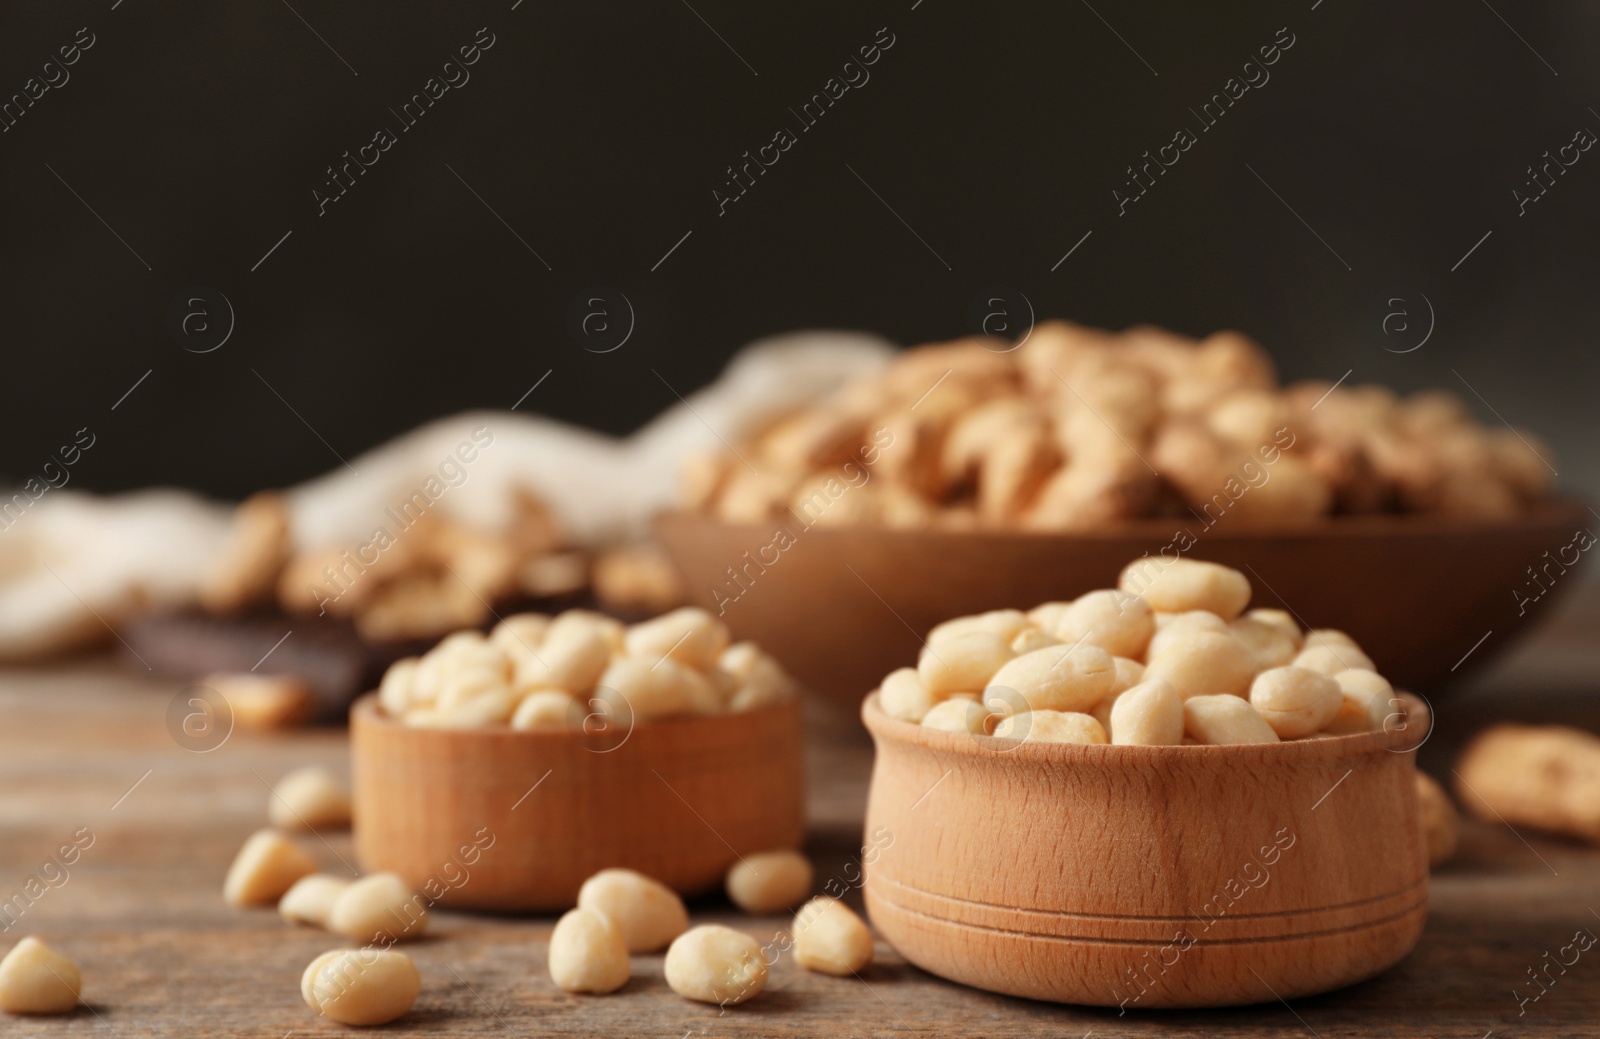 Photo of Shelled peanuts in wooden bowls on table